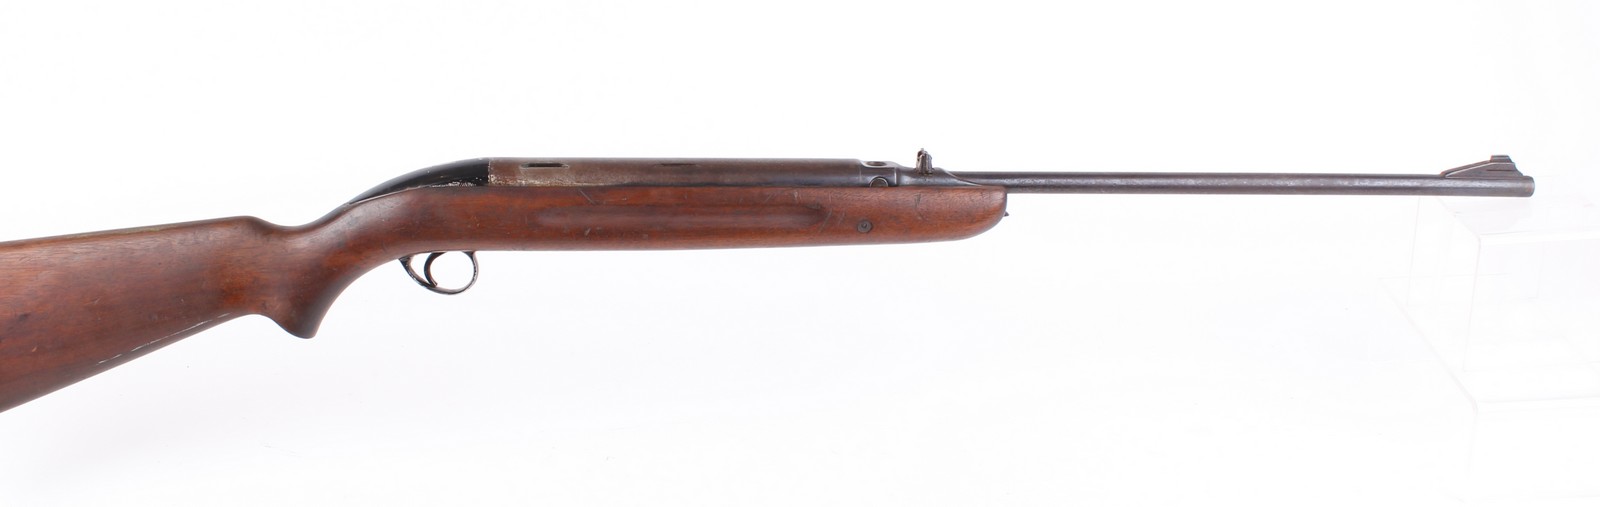 .22 BSA Airsporter Mk I or II, under lever air rifle, believed to be a GC serial number